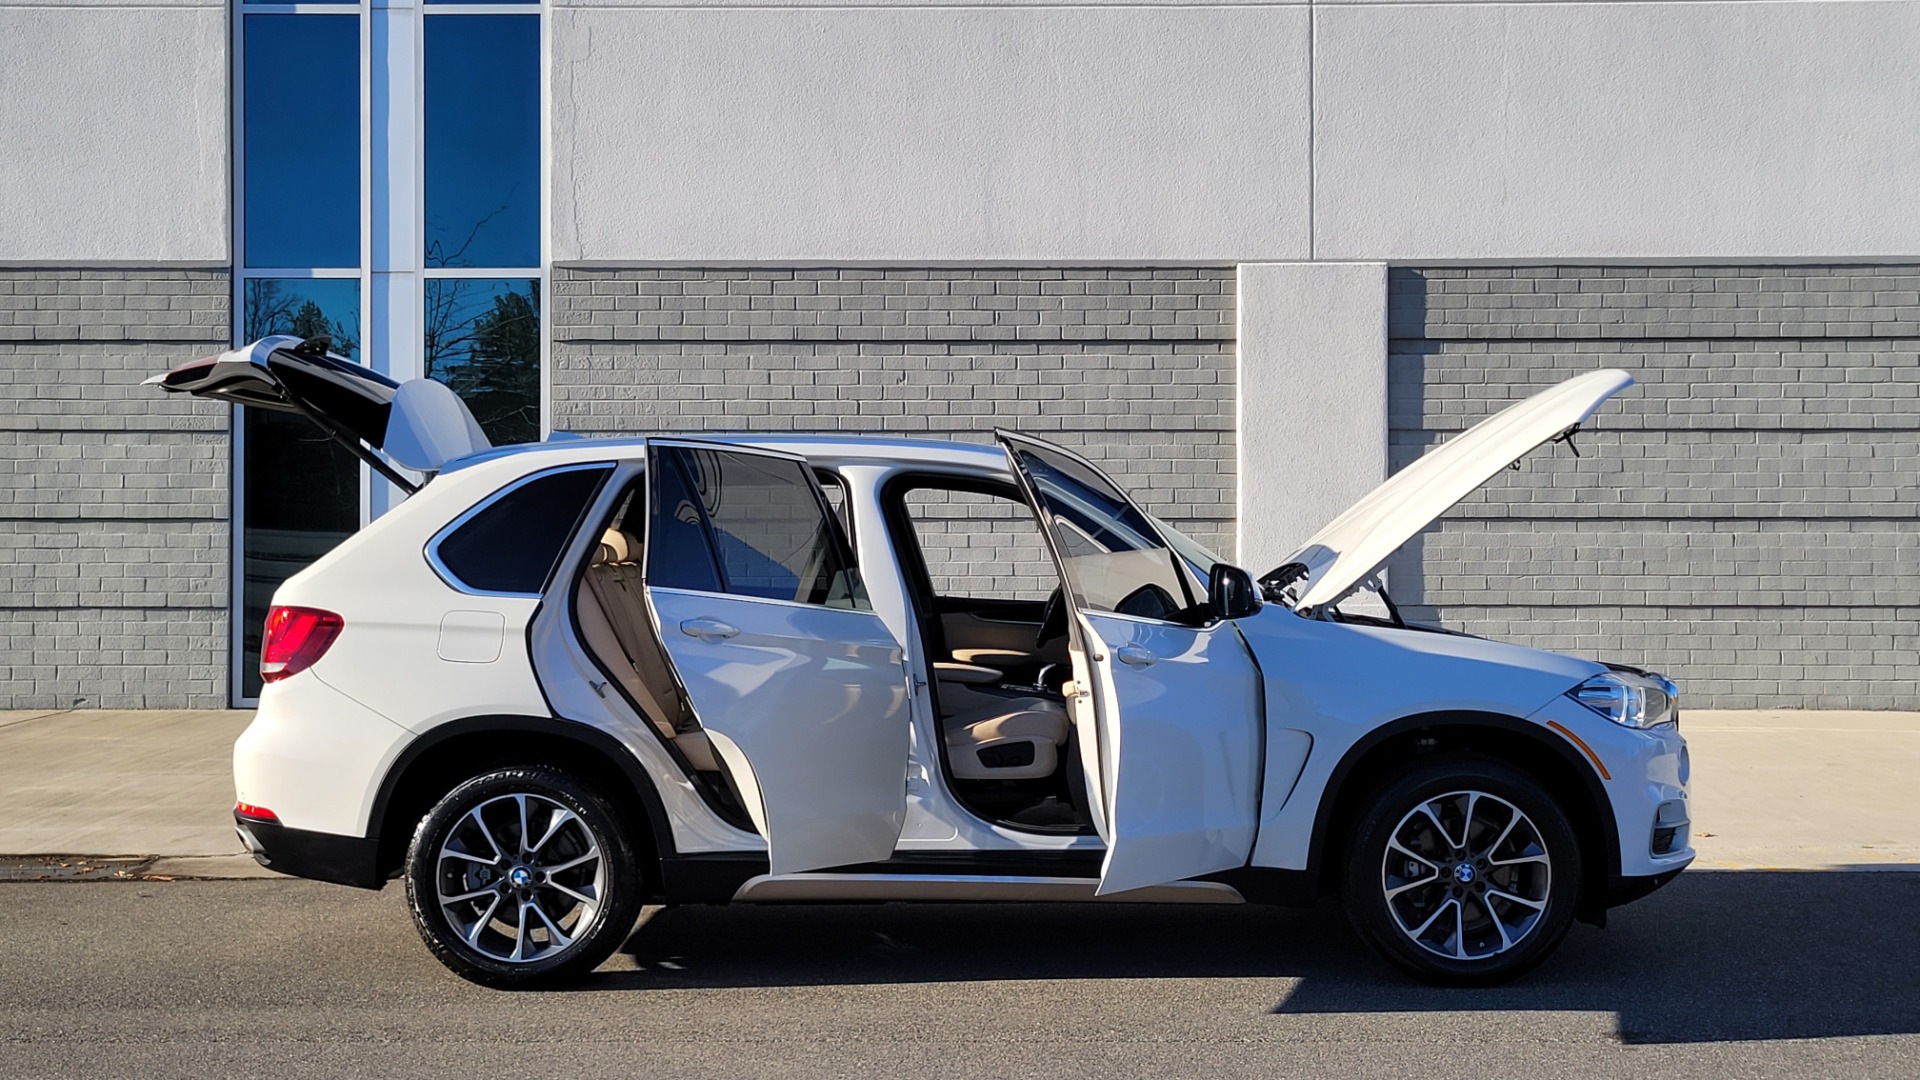 Used 2018 BMW X5 XDRIVE35I PREMIUM / DRVR ASST / HUD / WIRELESS CHARGING / HEATED SEATS for sale $42,995 at Formula Imports in Charlotte NC 28227 12